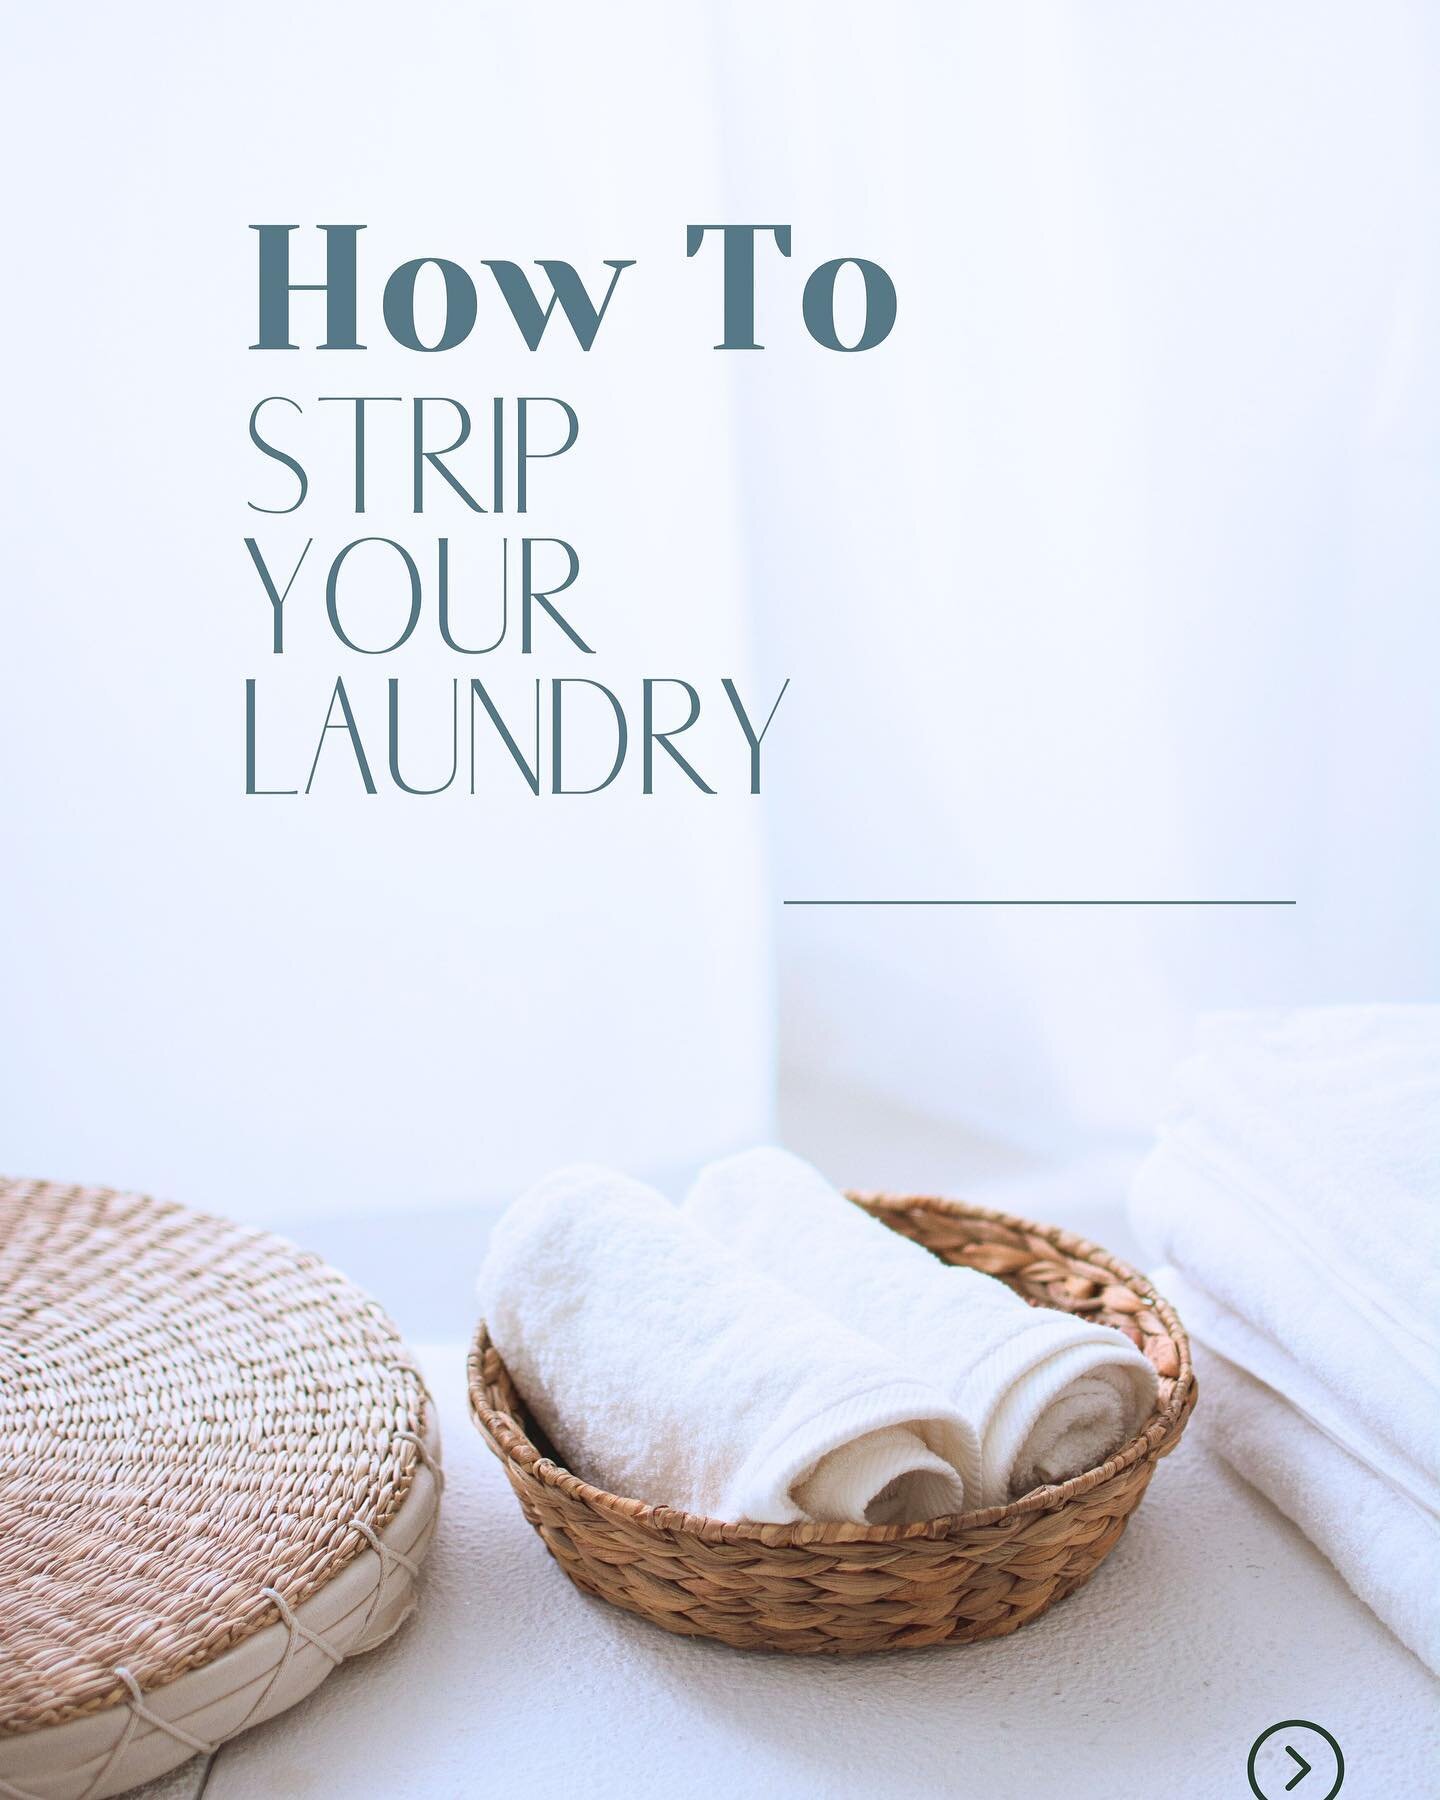 🧺 laundry stripping!

One of my favorite ways to keep laundry squeaky clean and bright!

Laundry stripping is a necessity about once a quarter in this house!  
Essentially it &quot;detoxes&quot; your clothes and helps to remove any built-up products